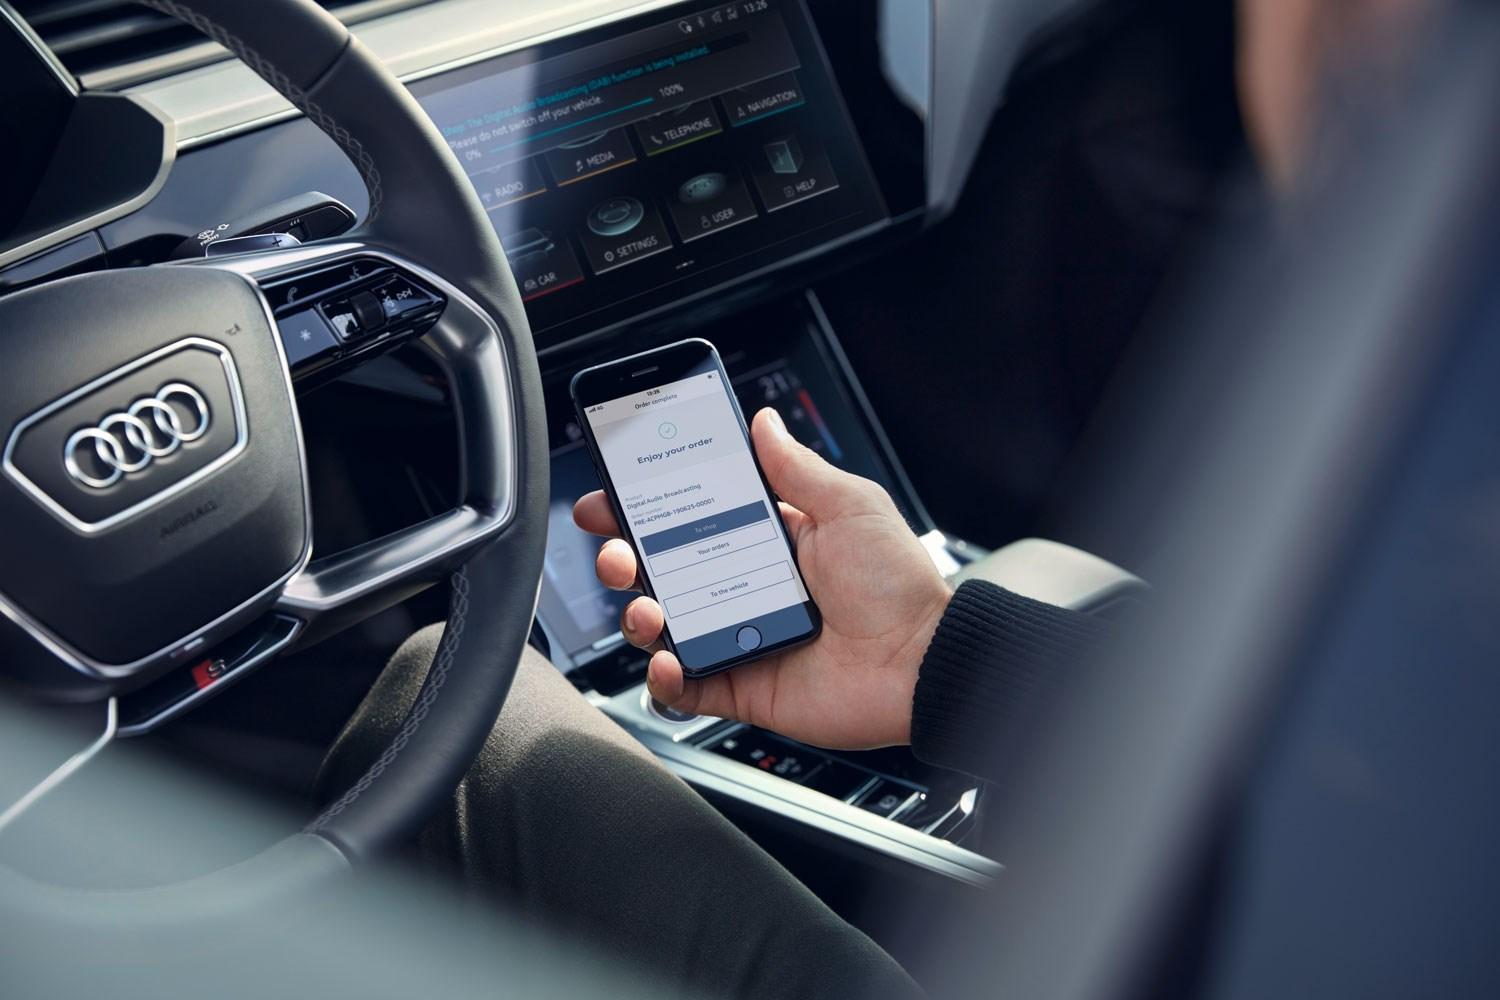 Image of customer with Audi connect app inside an Audi vehicle.